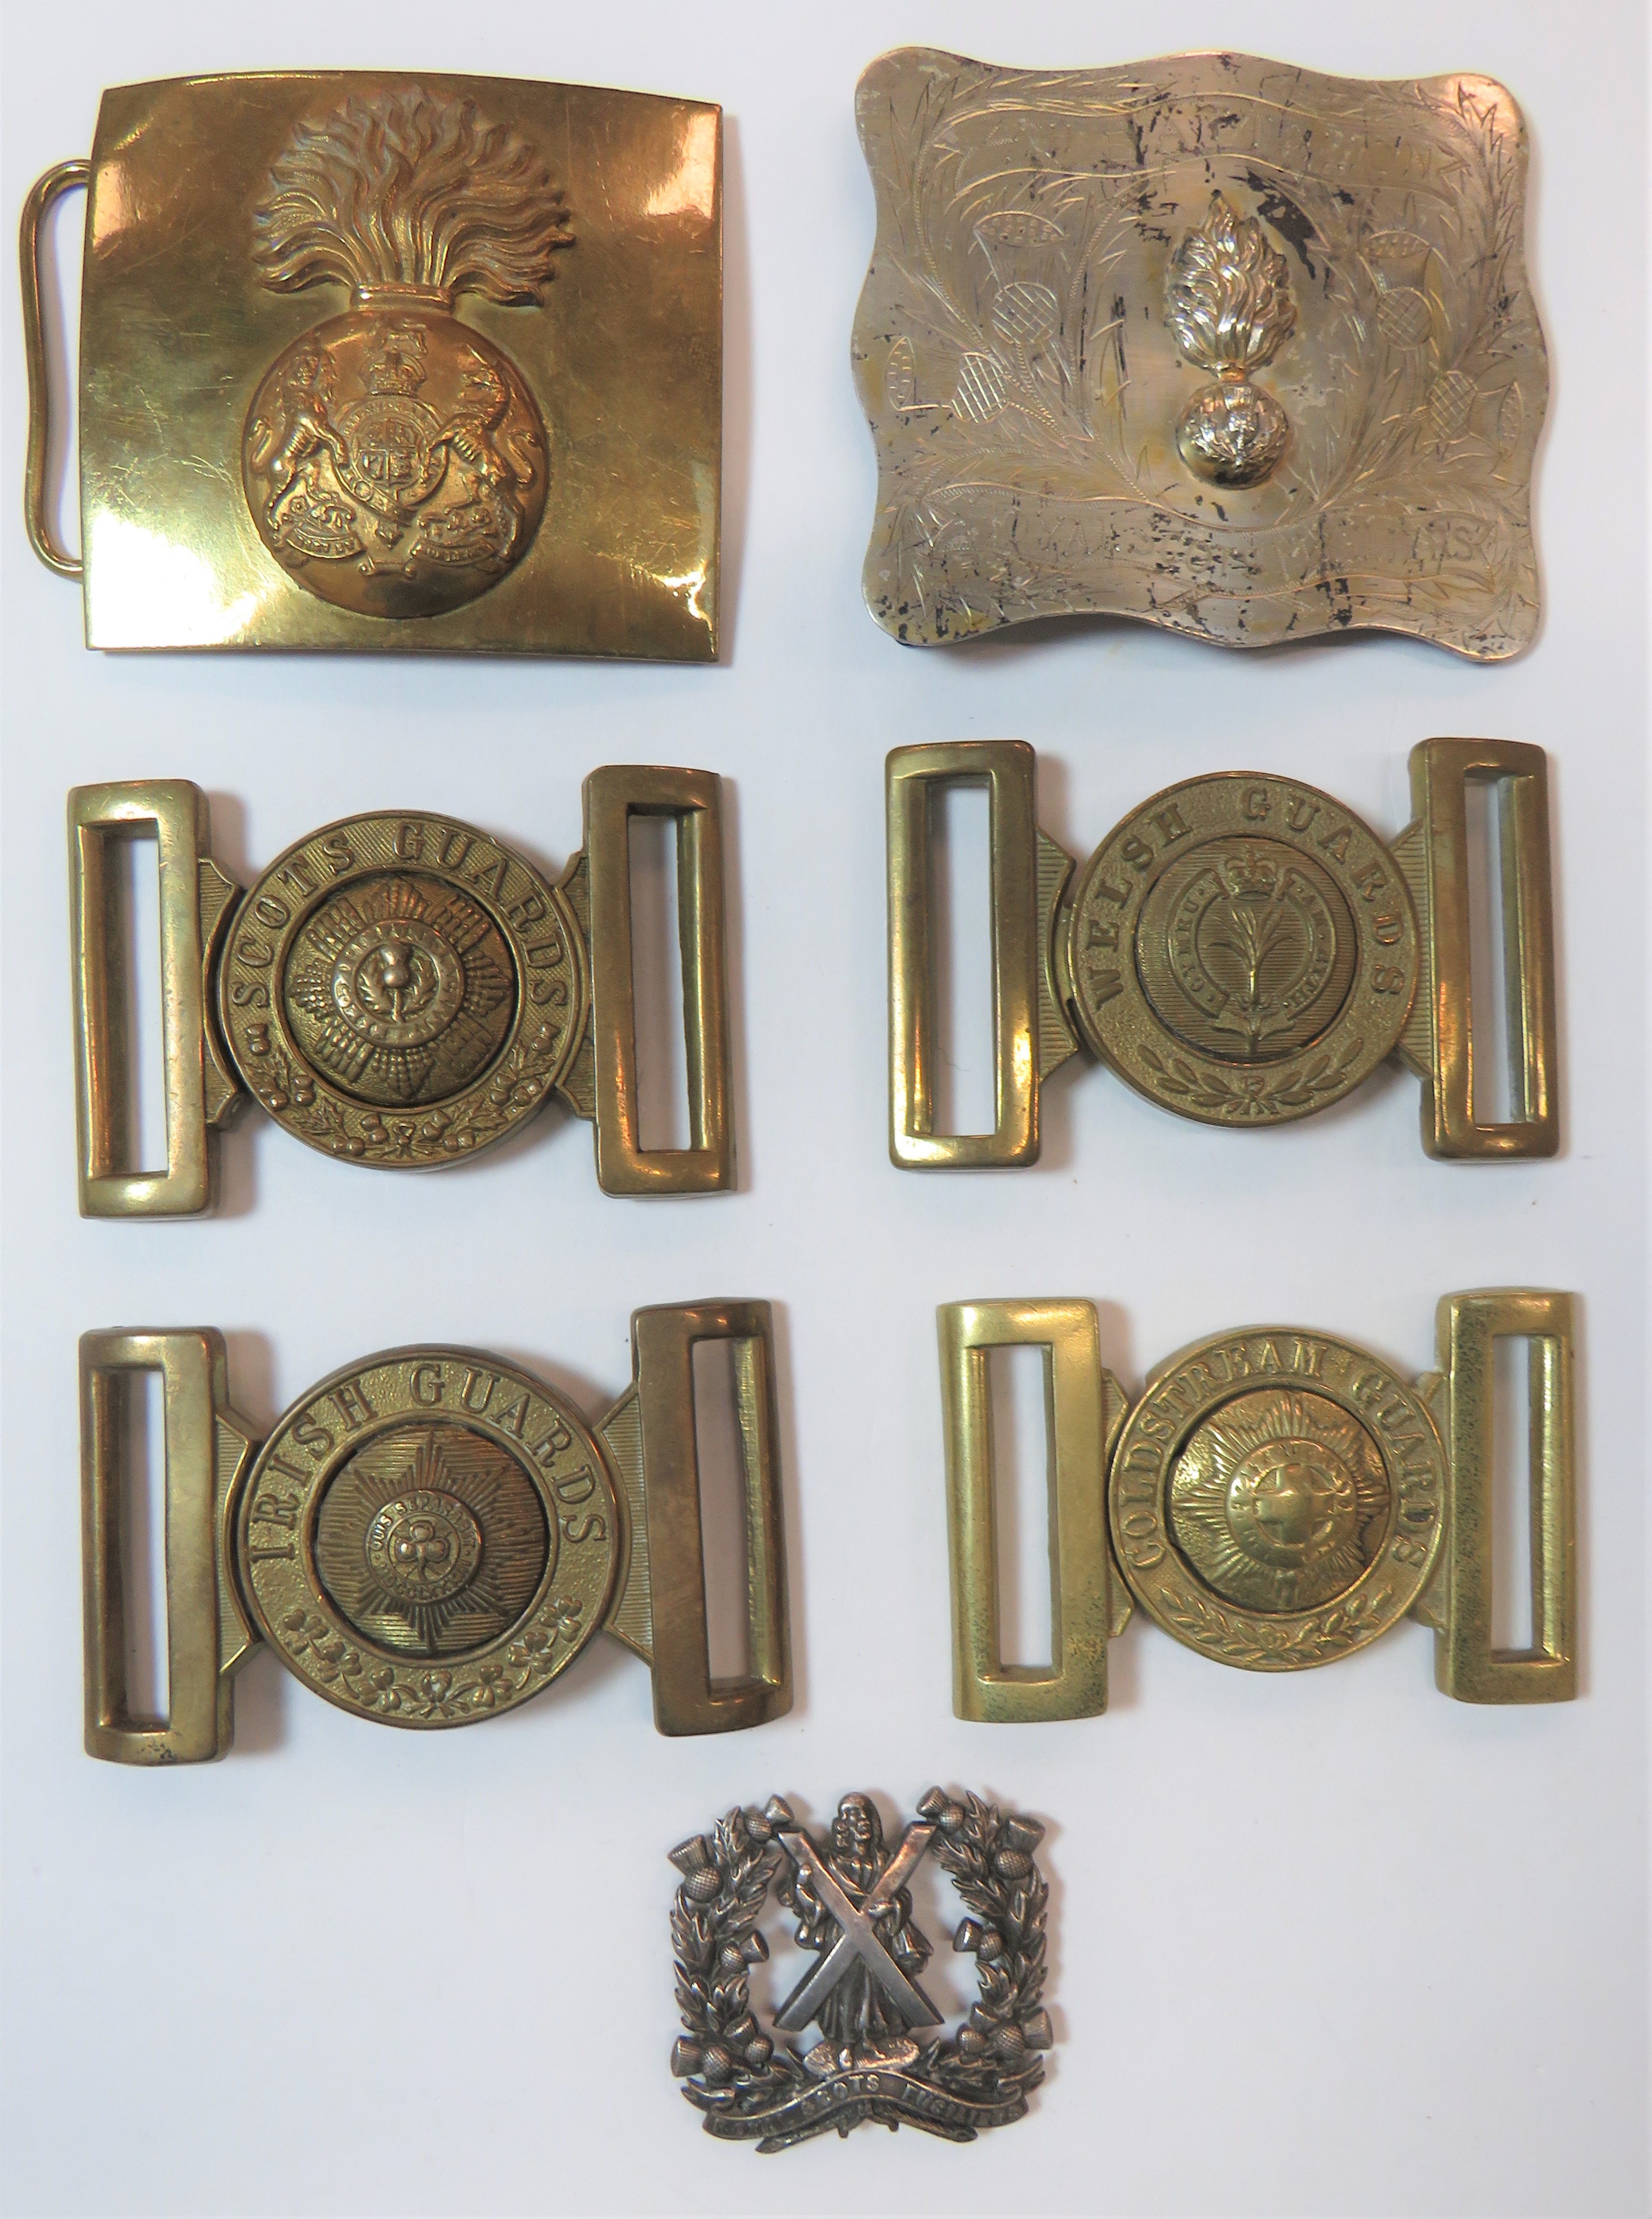 Belt Buckles Including Royal Scots Fusiliers consisting plated 4th Battalion Royal Scots Fusiliers